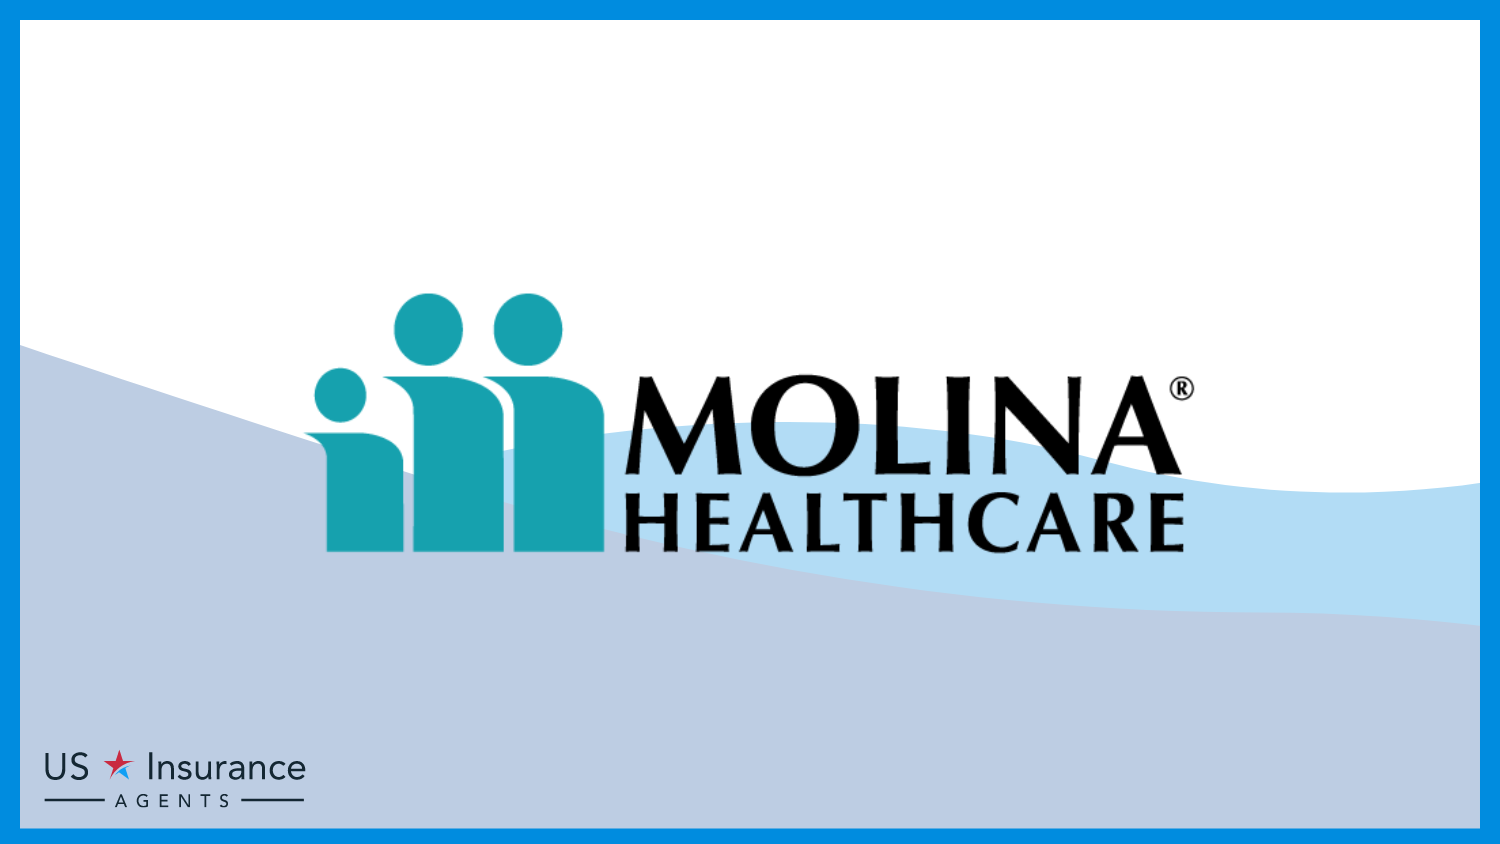 Molina Healthcare: Best HMO Health Plans in Texas